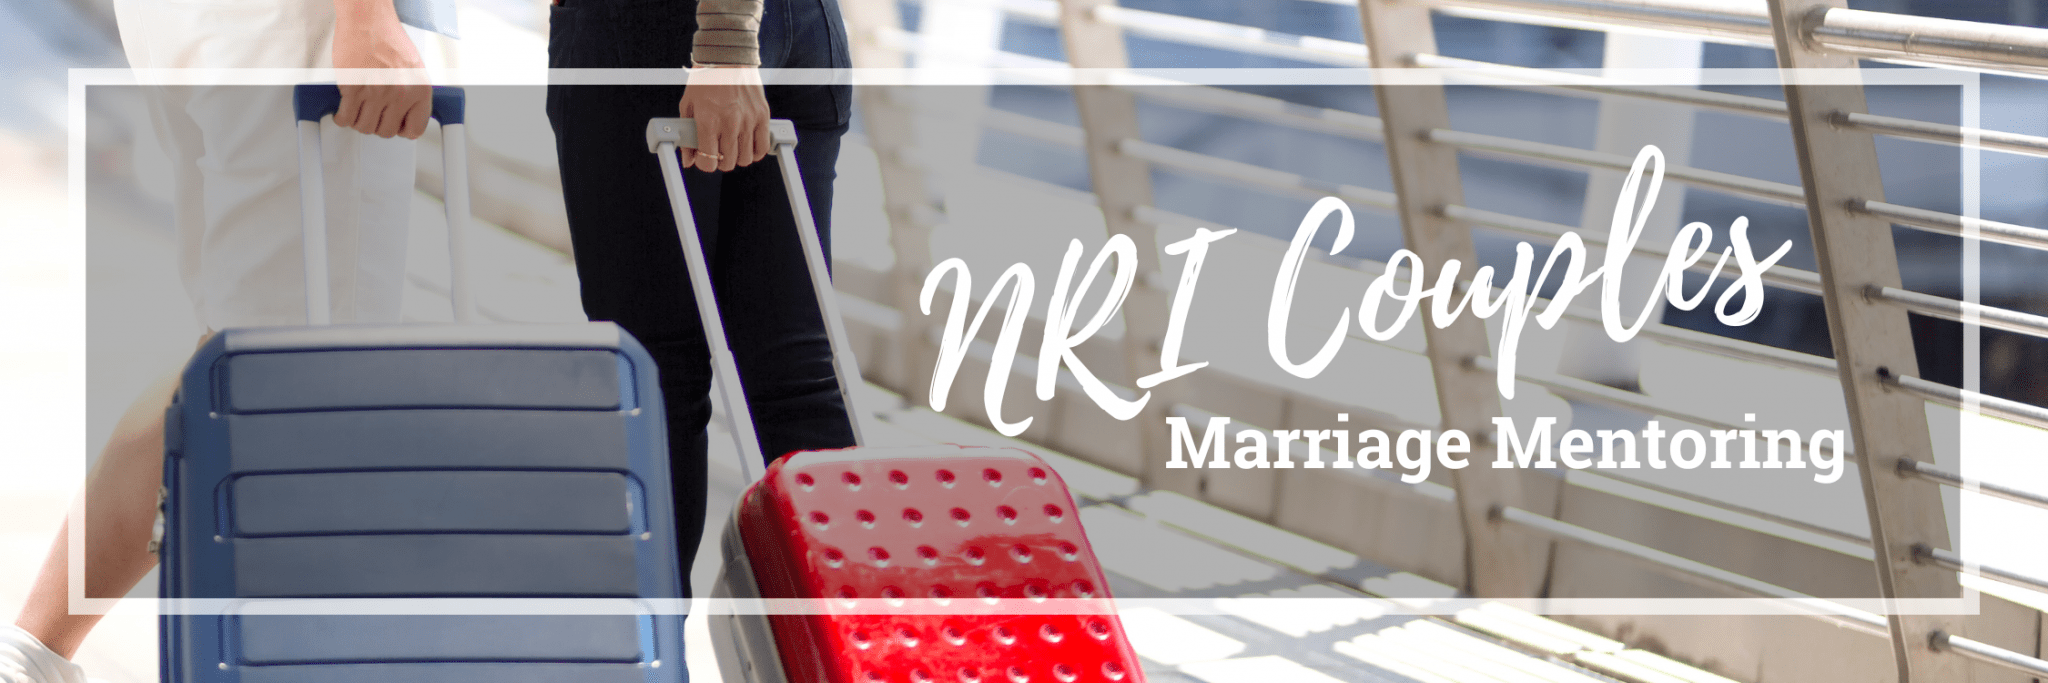 NRI Couples Marriage Mentoring